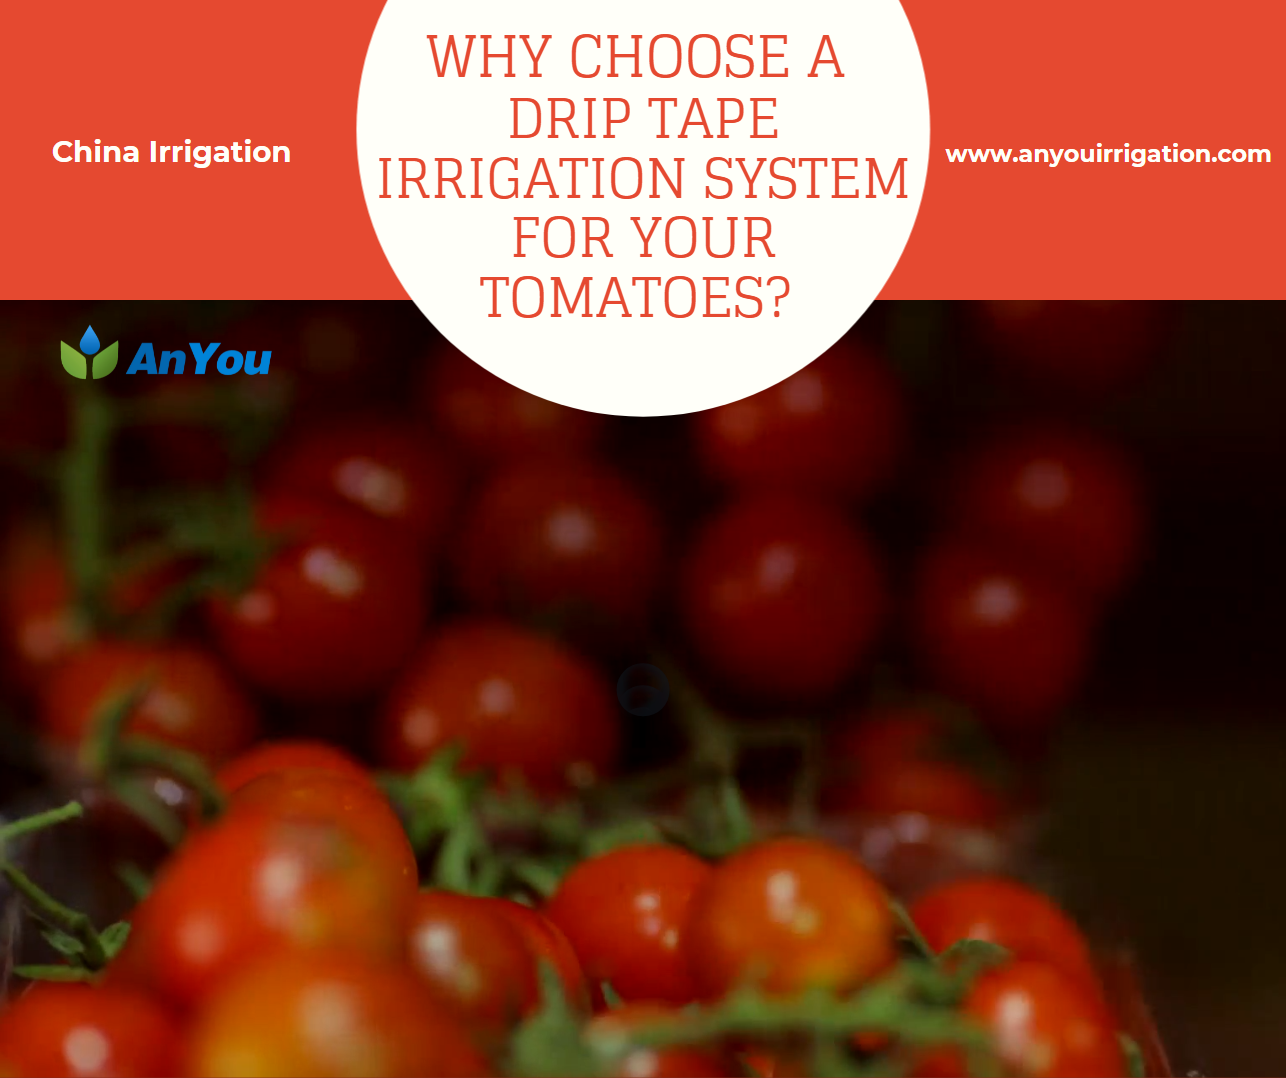 Why choose a drip tape irrigation system for your tomotoes